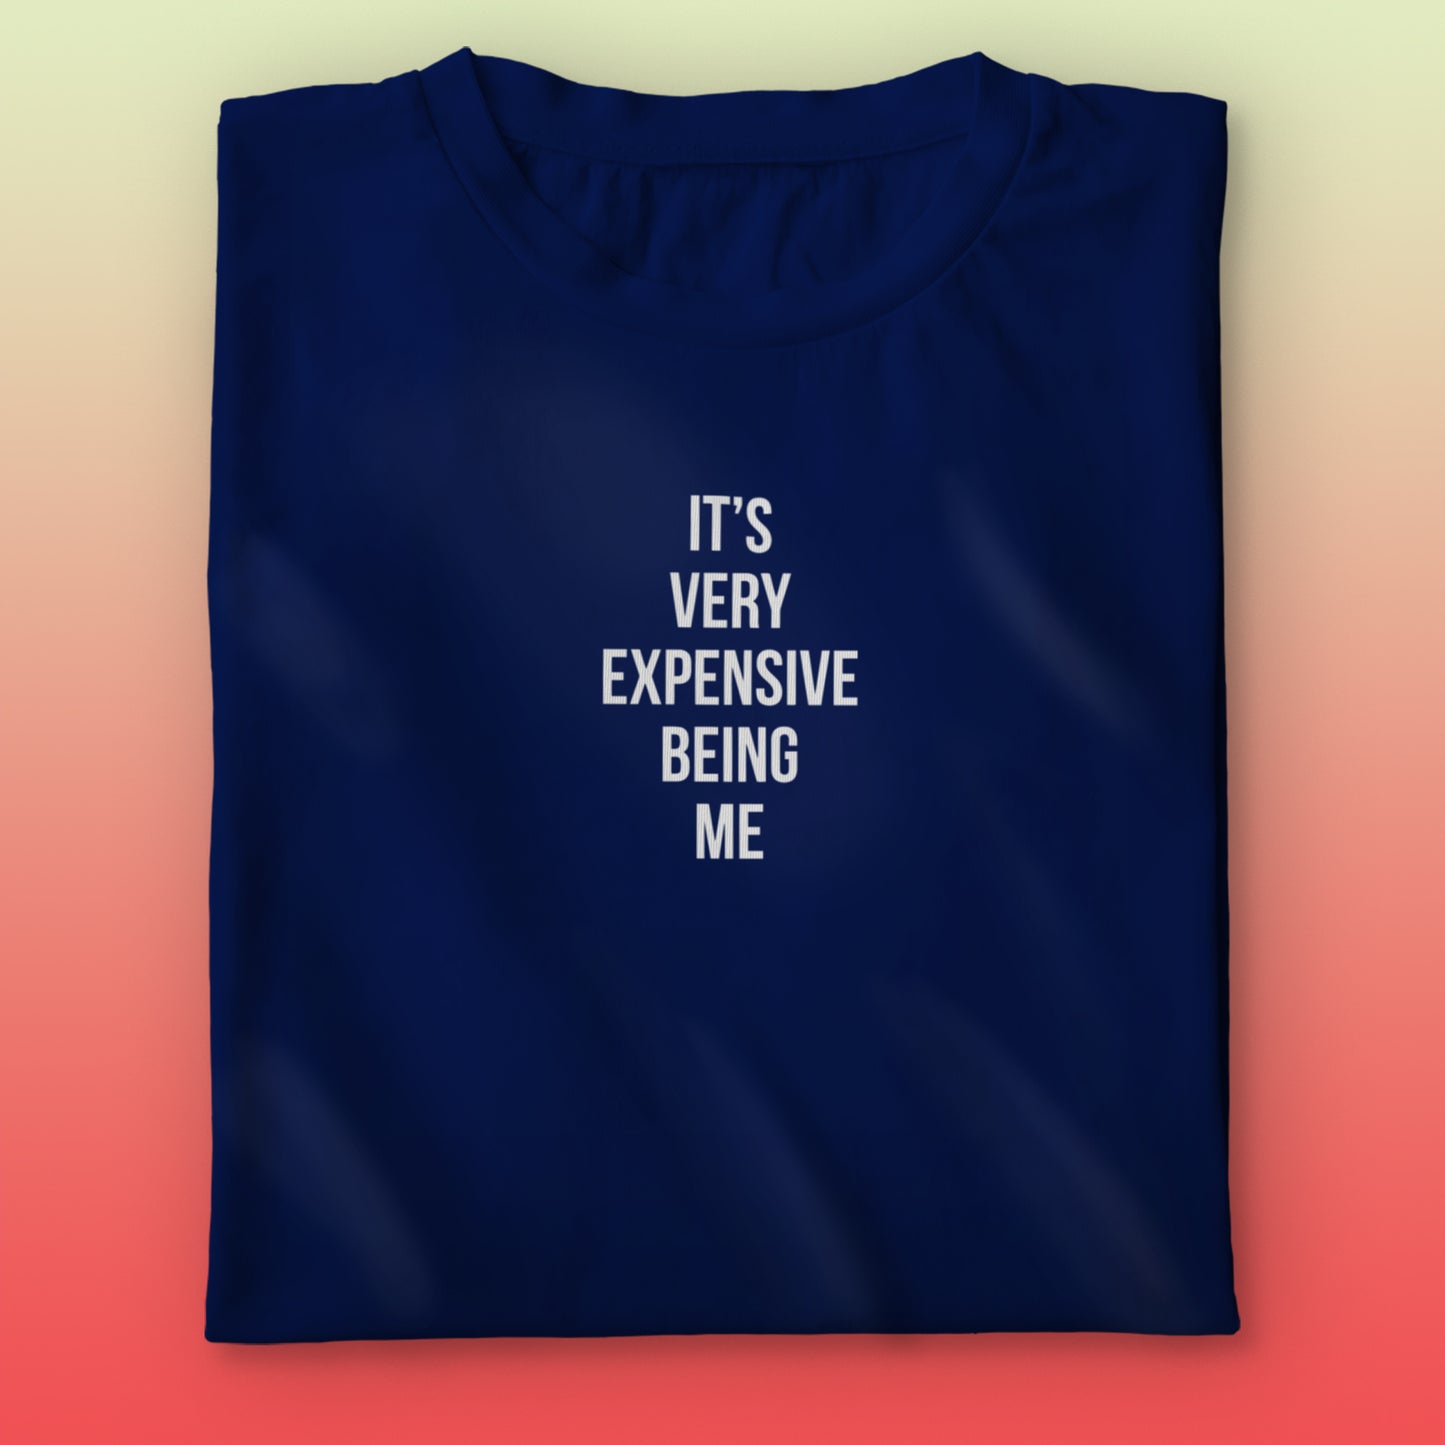 Expensive T-shirt